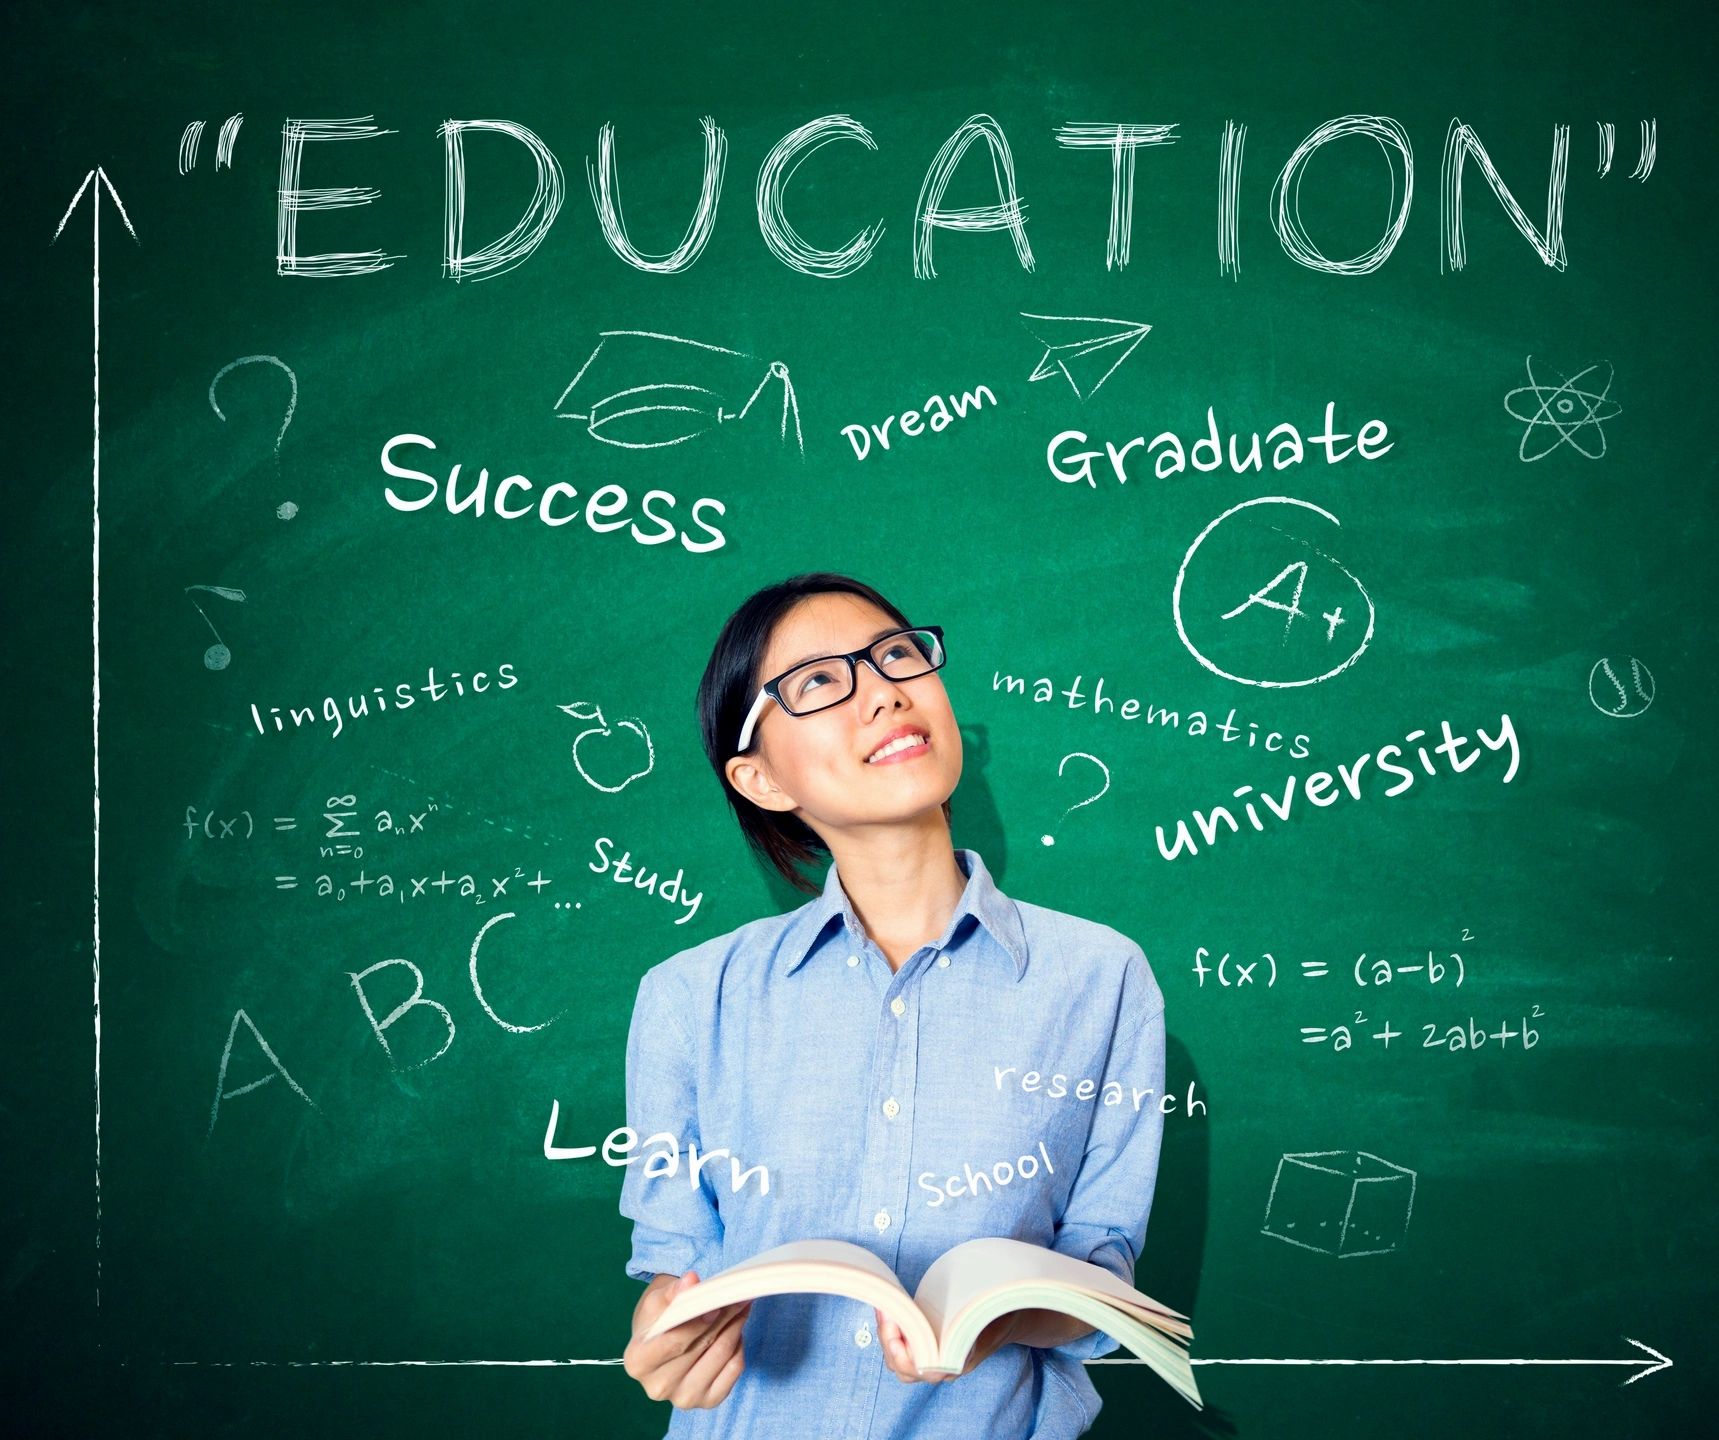 Image Of A Person Standing In Front Of A Blackboard Holding An Open Book. The Blackboard As The Word 'education' In Large Letters At The Top With Smaller Words, Like Success, Graduate, And University, Scattered On The Rest Of The Board.